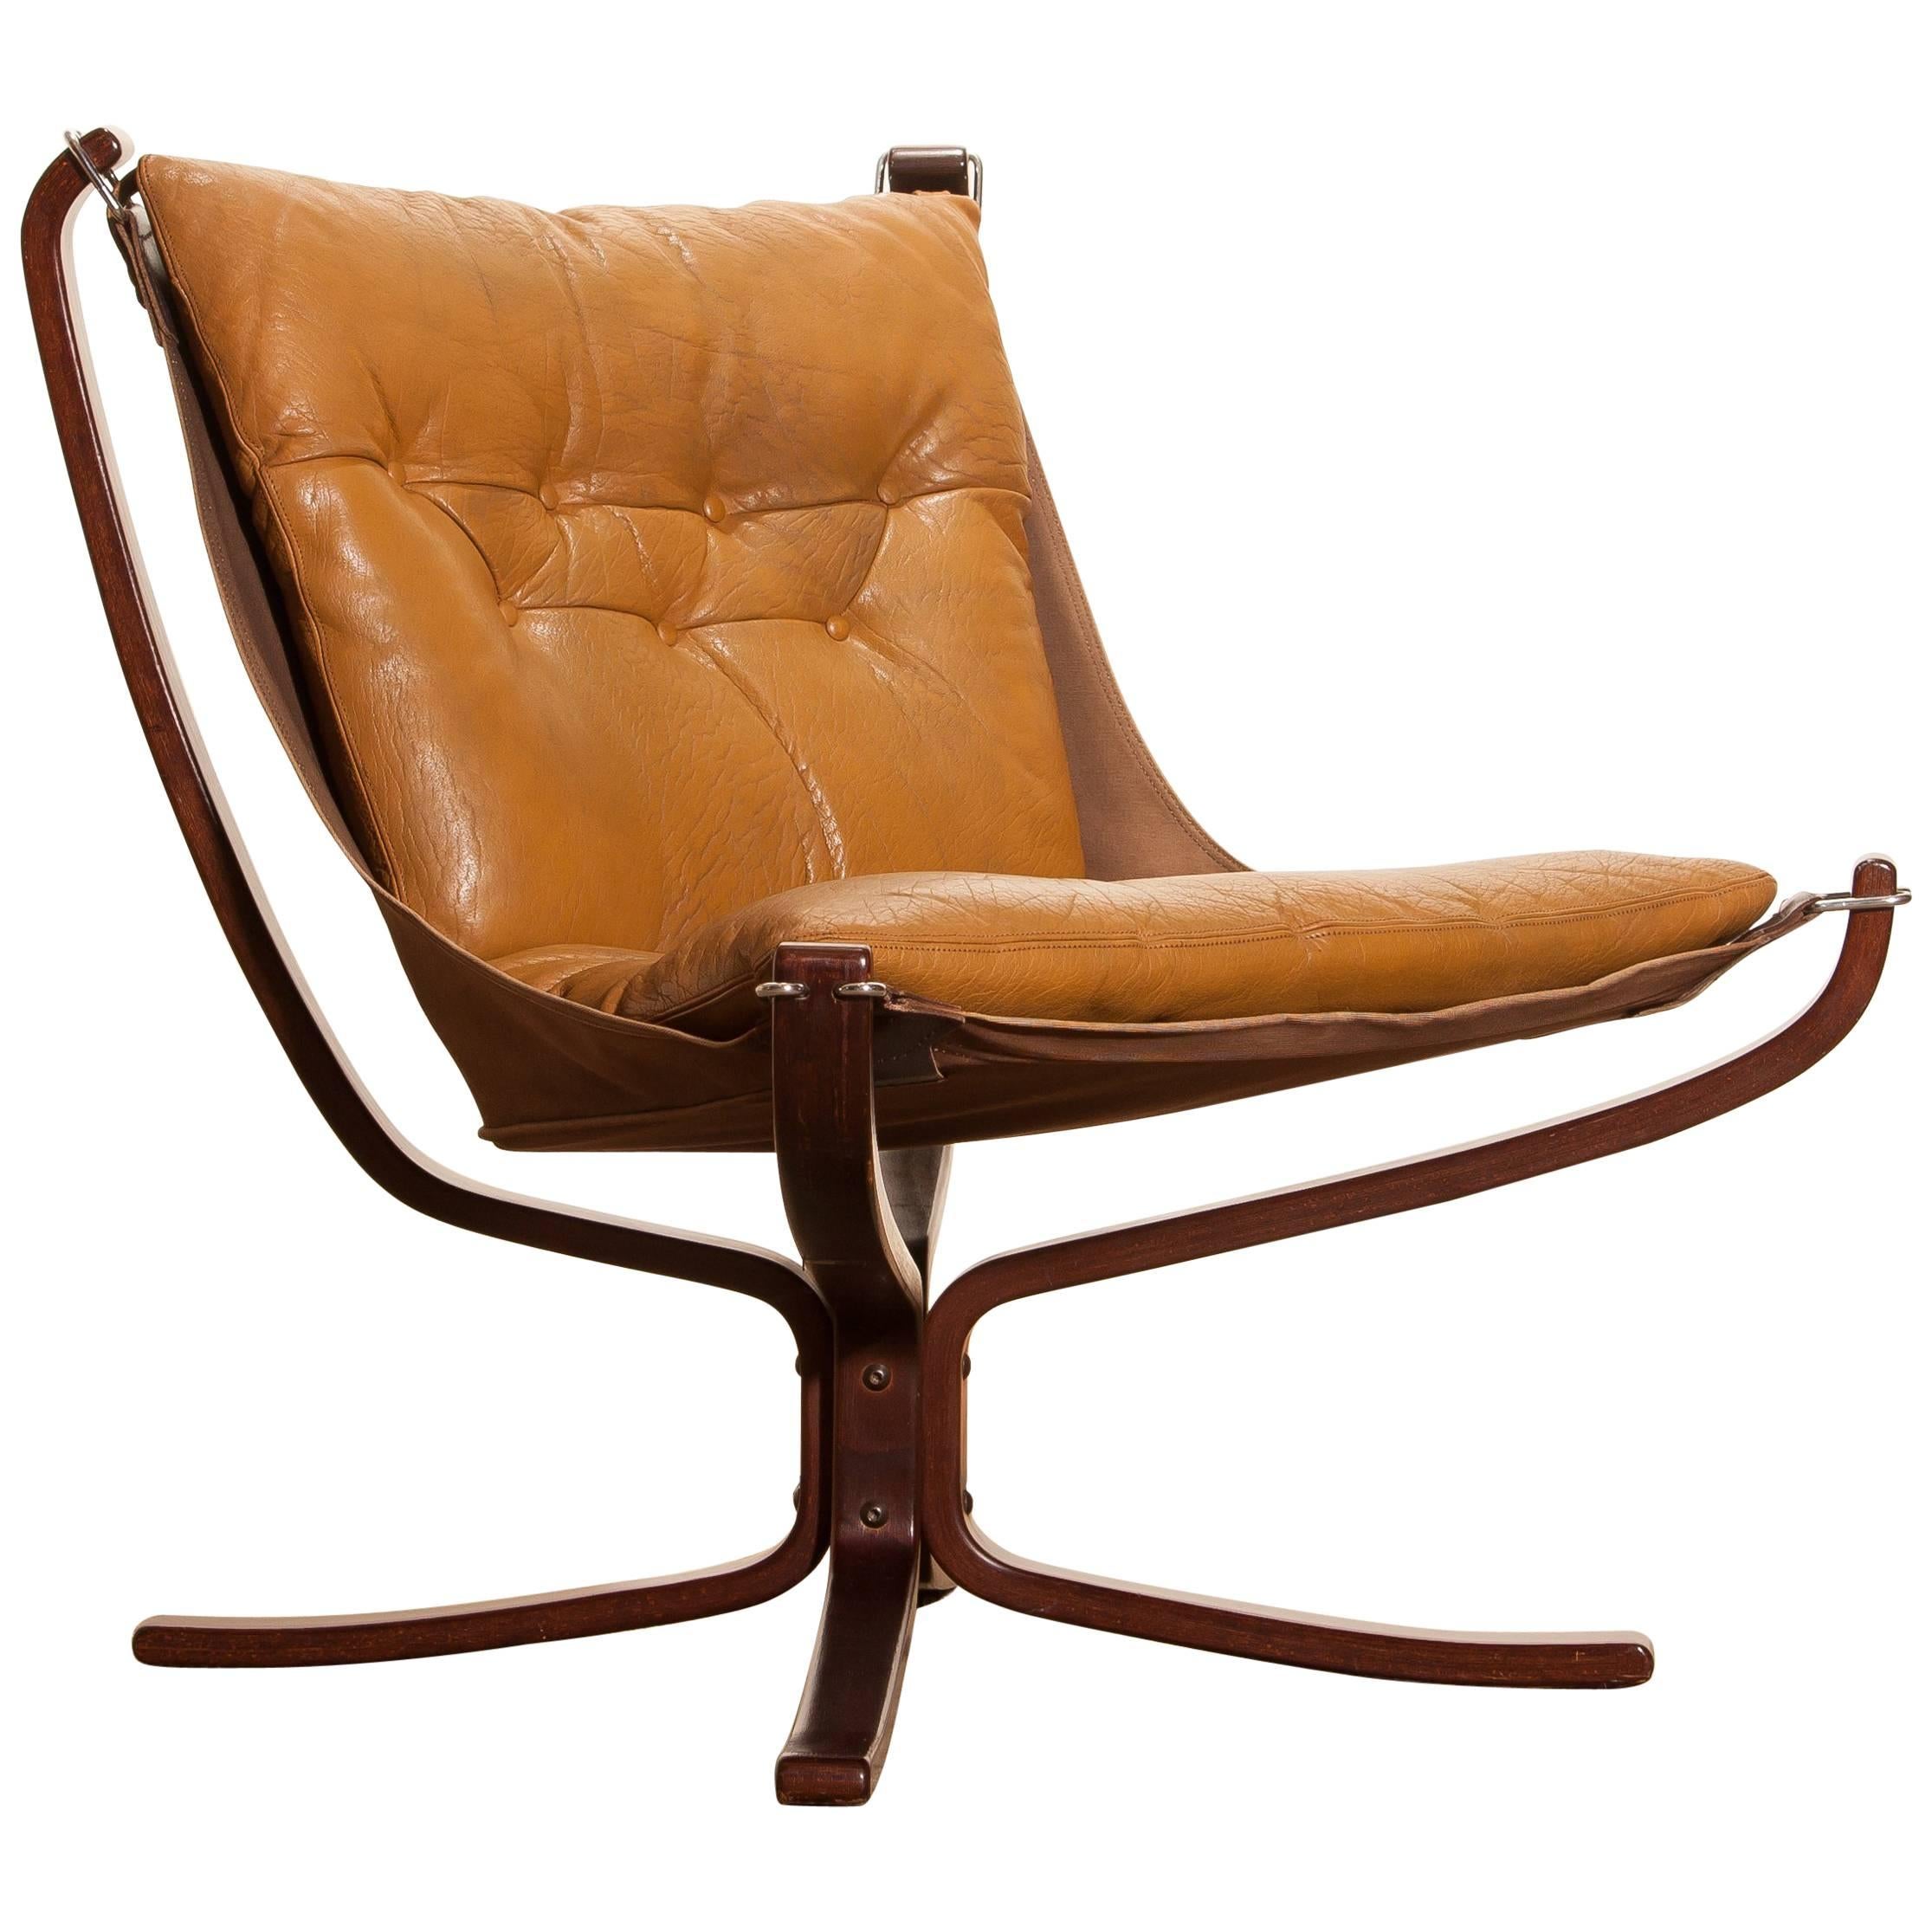 1970s, Camel Leather 'Falcon' Lounge or Armchair by Sigurd Ressell